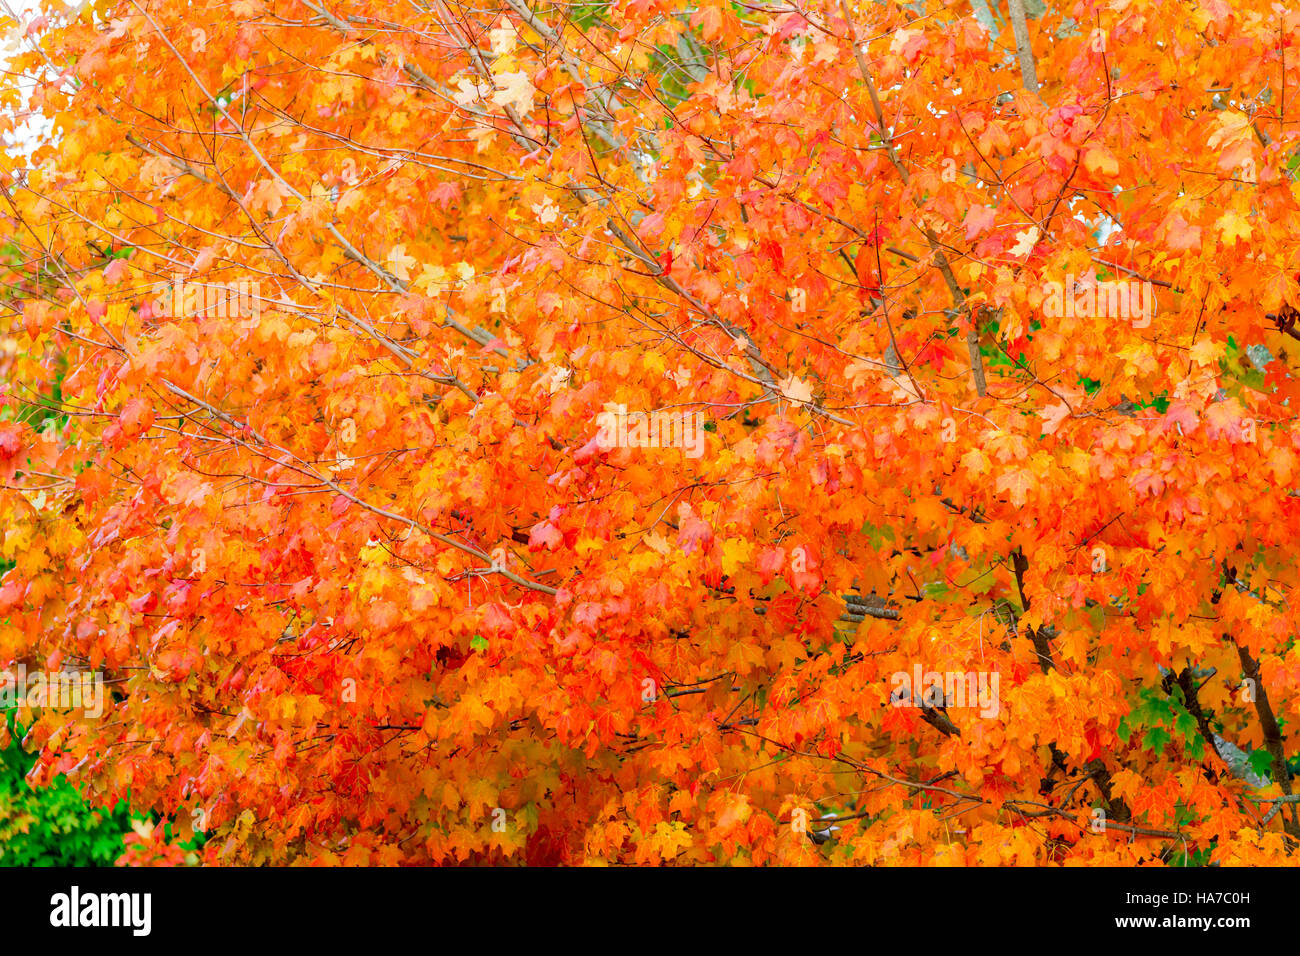 bright leafs on a maple tree in fall, rich in color, oranges and reds Stock Photo